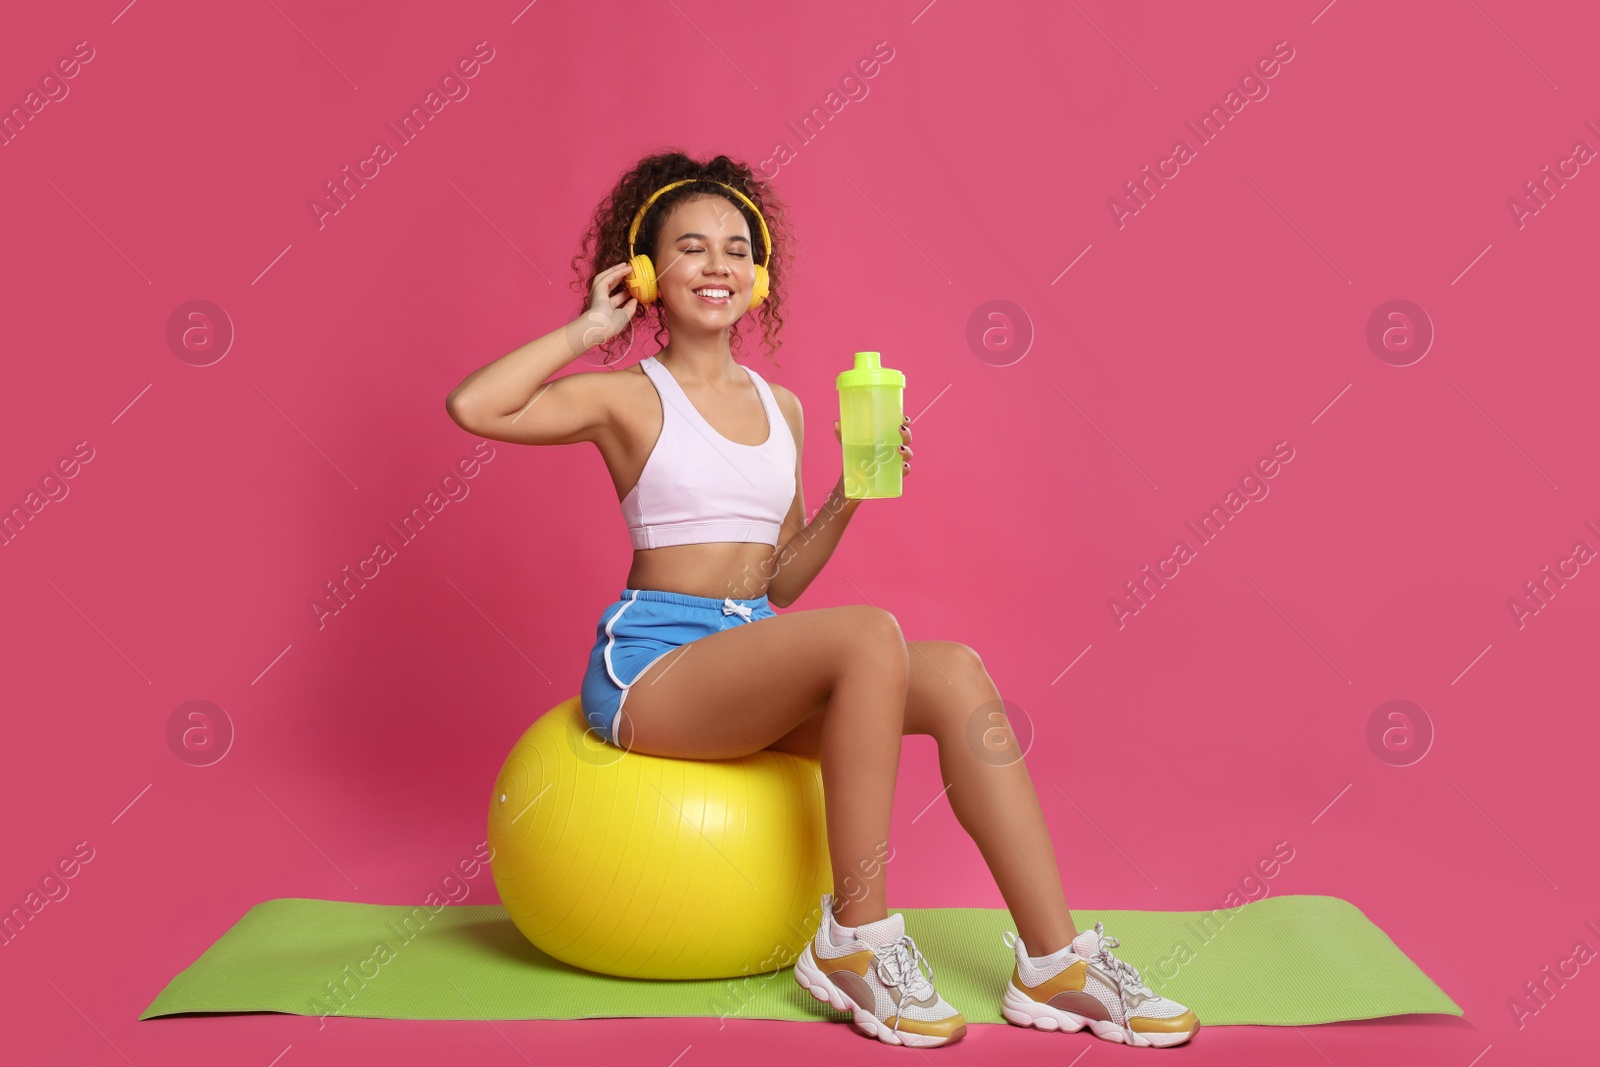 Photo of Beautiful African American woman with headphones  on yoga mat against pink background